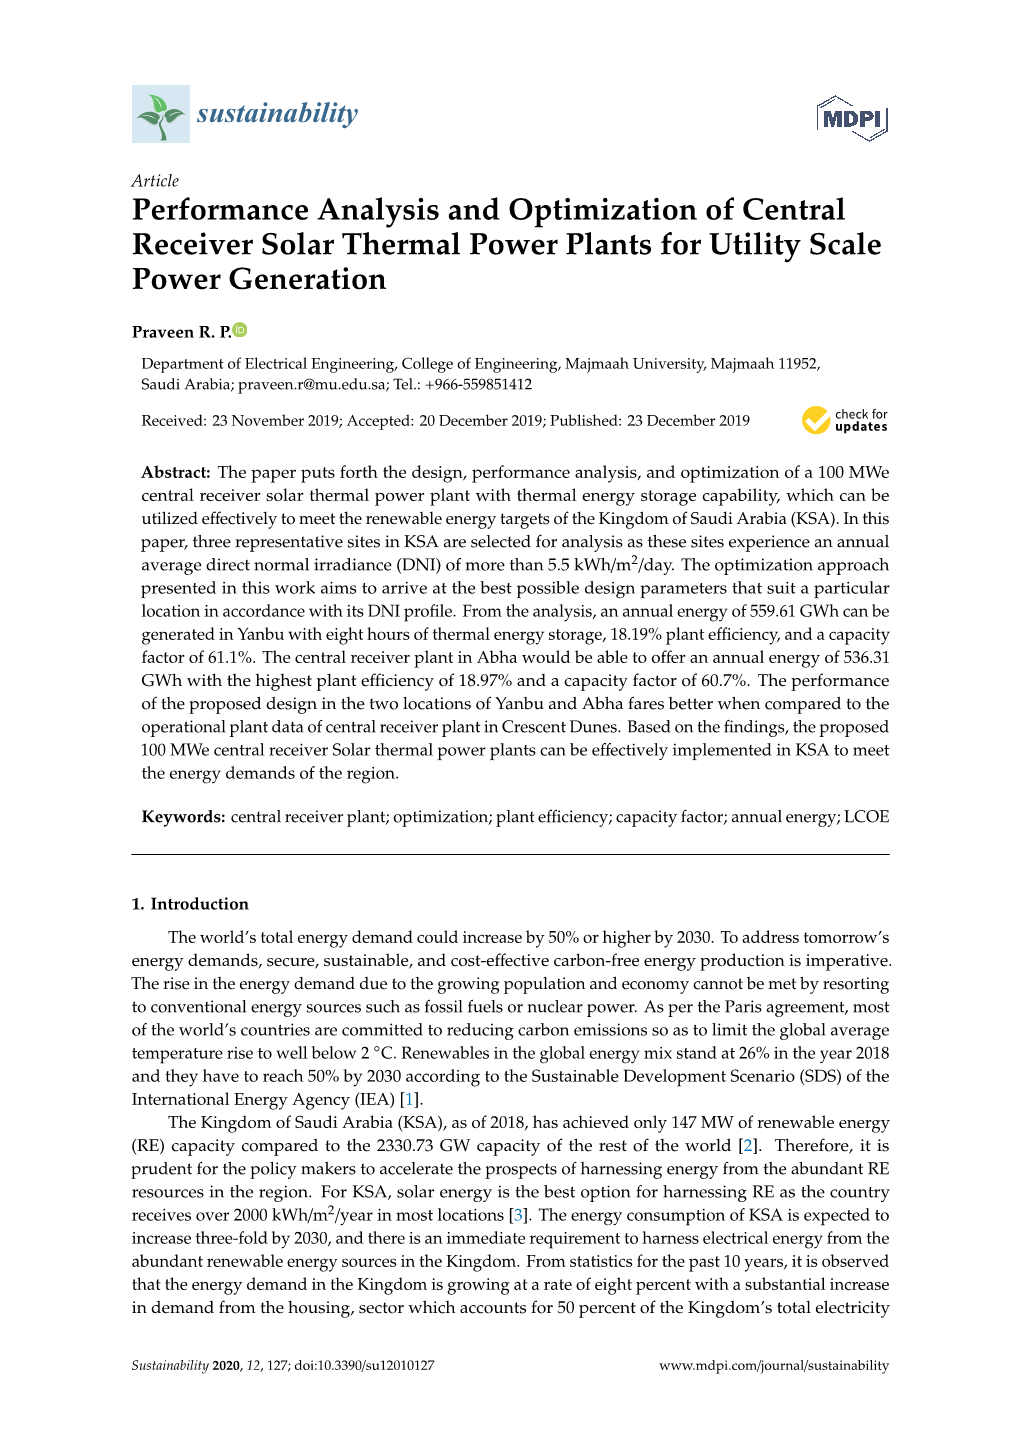 Performance Analysis and Optimization of Central Receiver Solar Thermal Power Plants for Utility Scale Power Generation